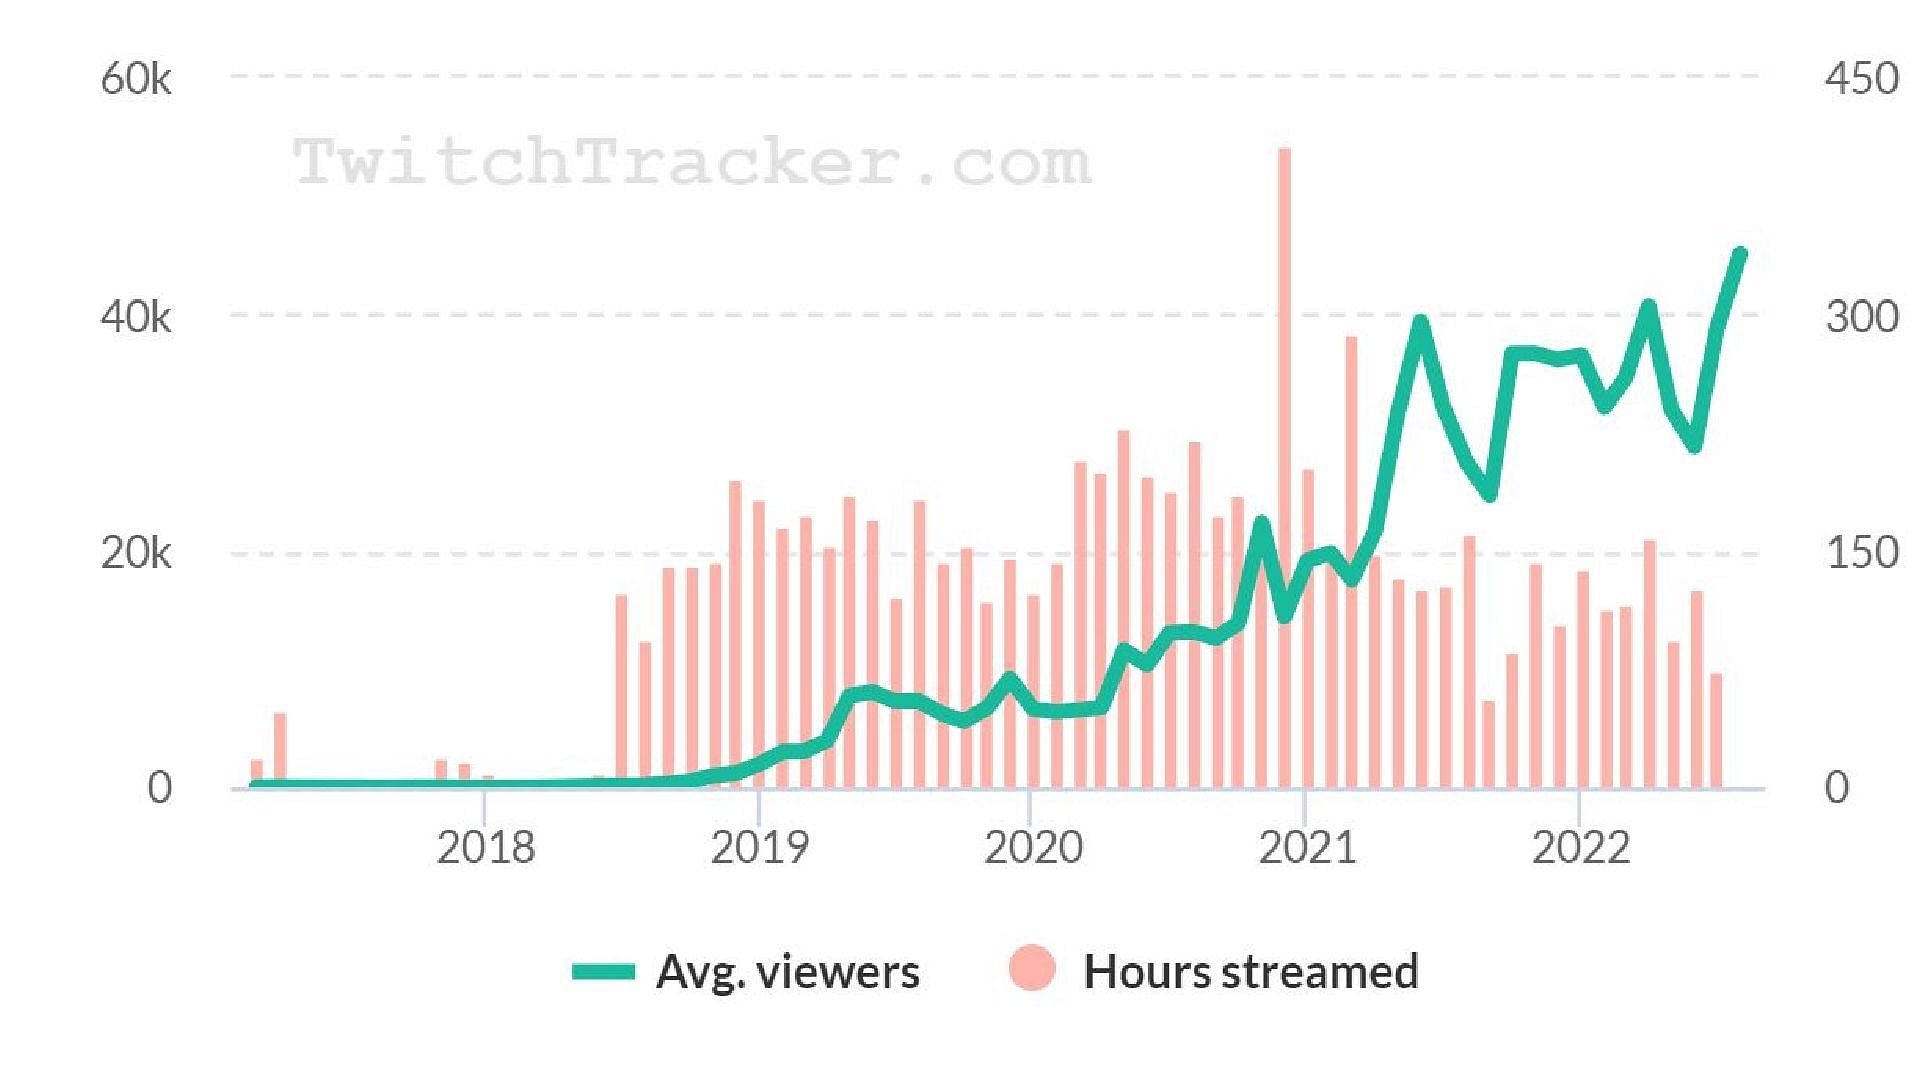 His viewership over the years (Image via TwitchTracker)